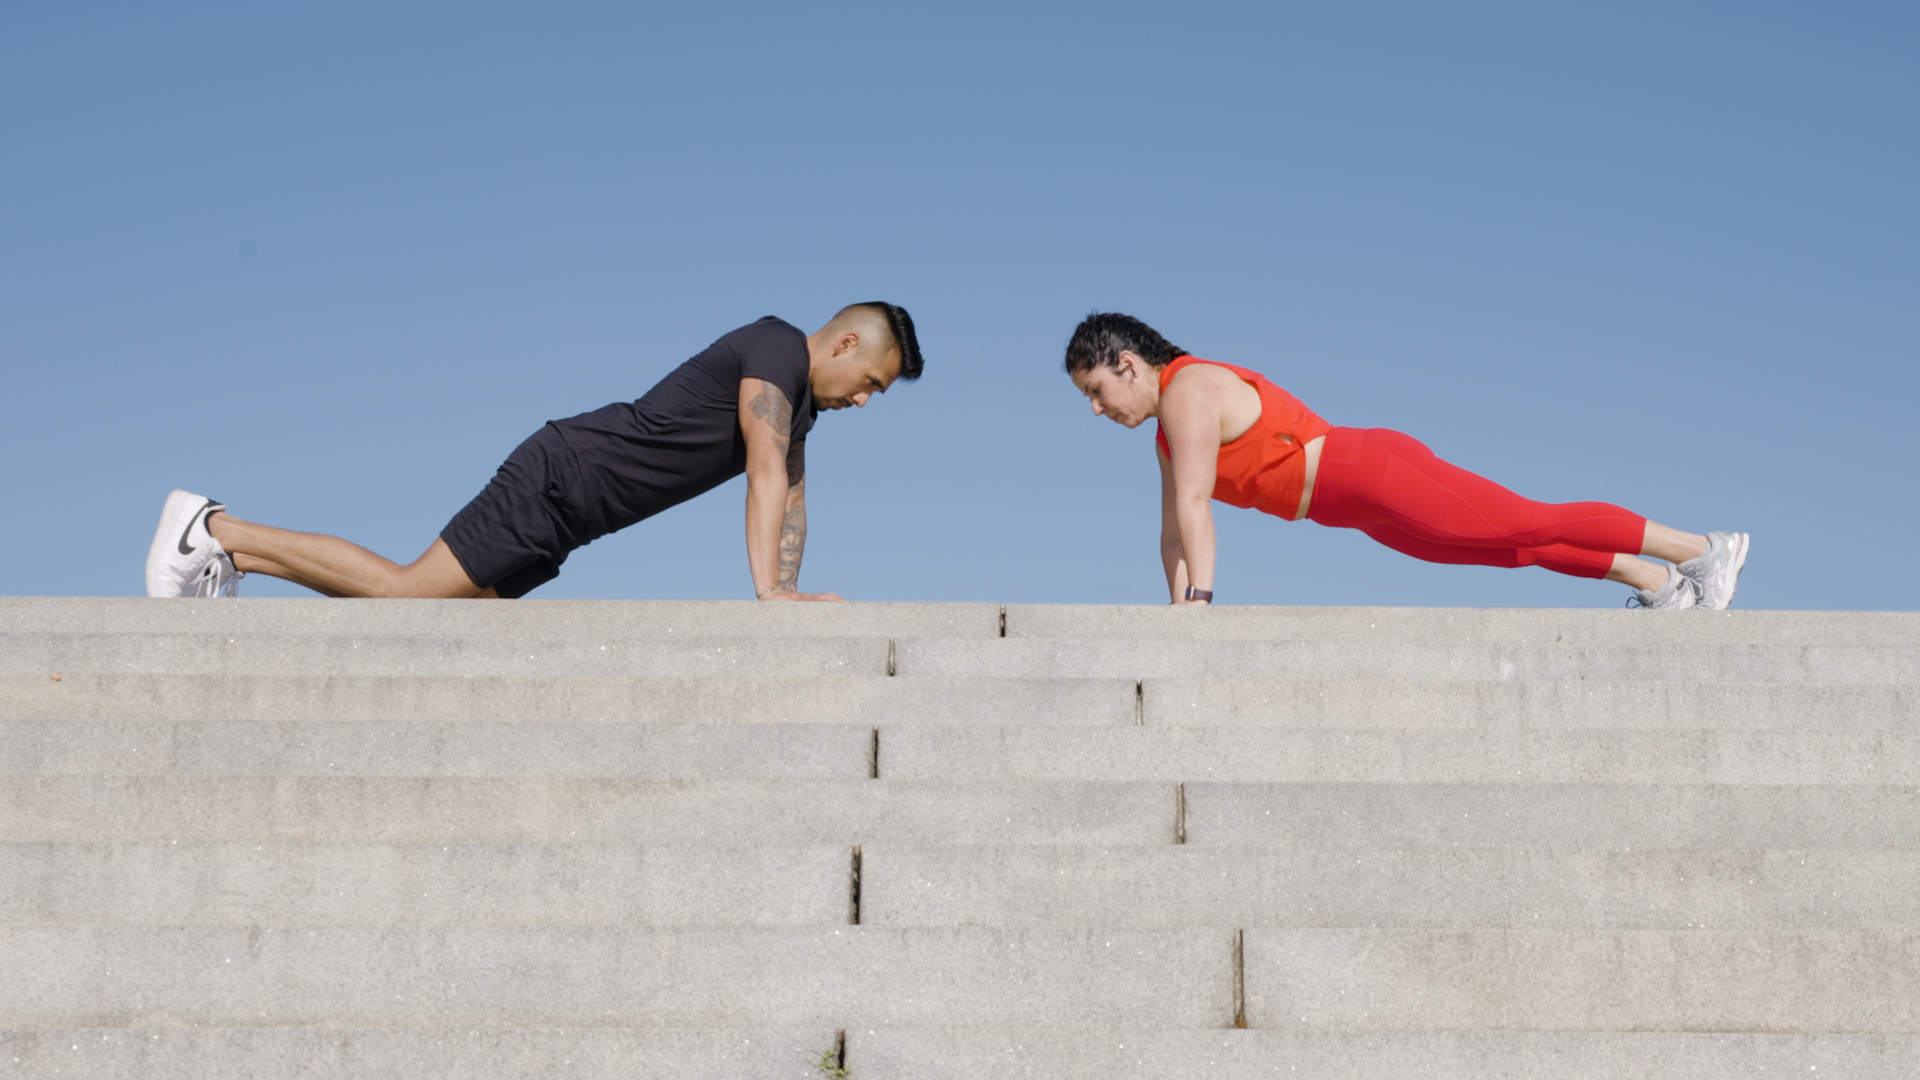 No more girl push-ups: Pushing back against outdated standards